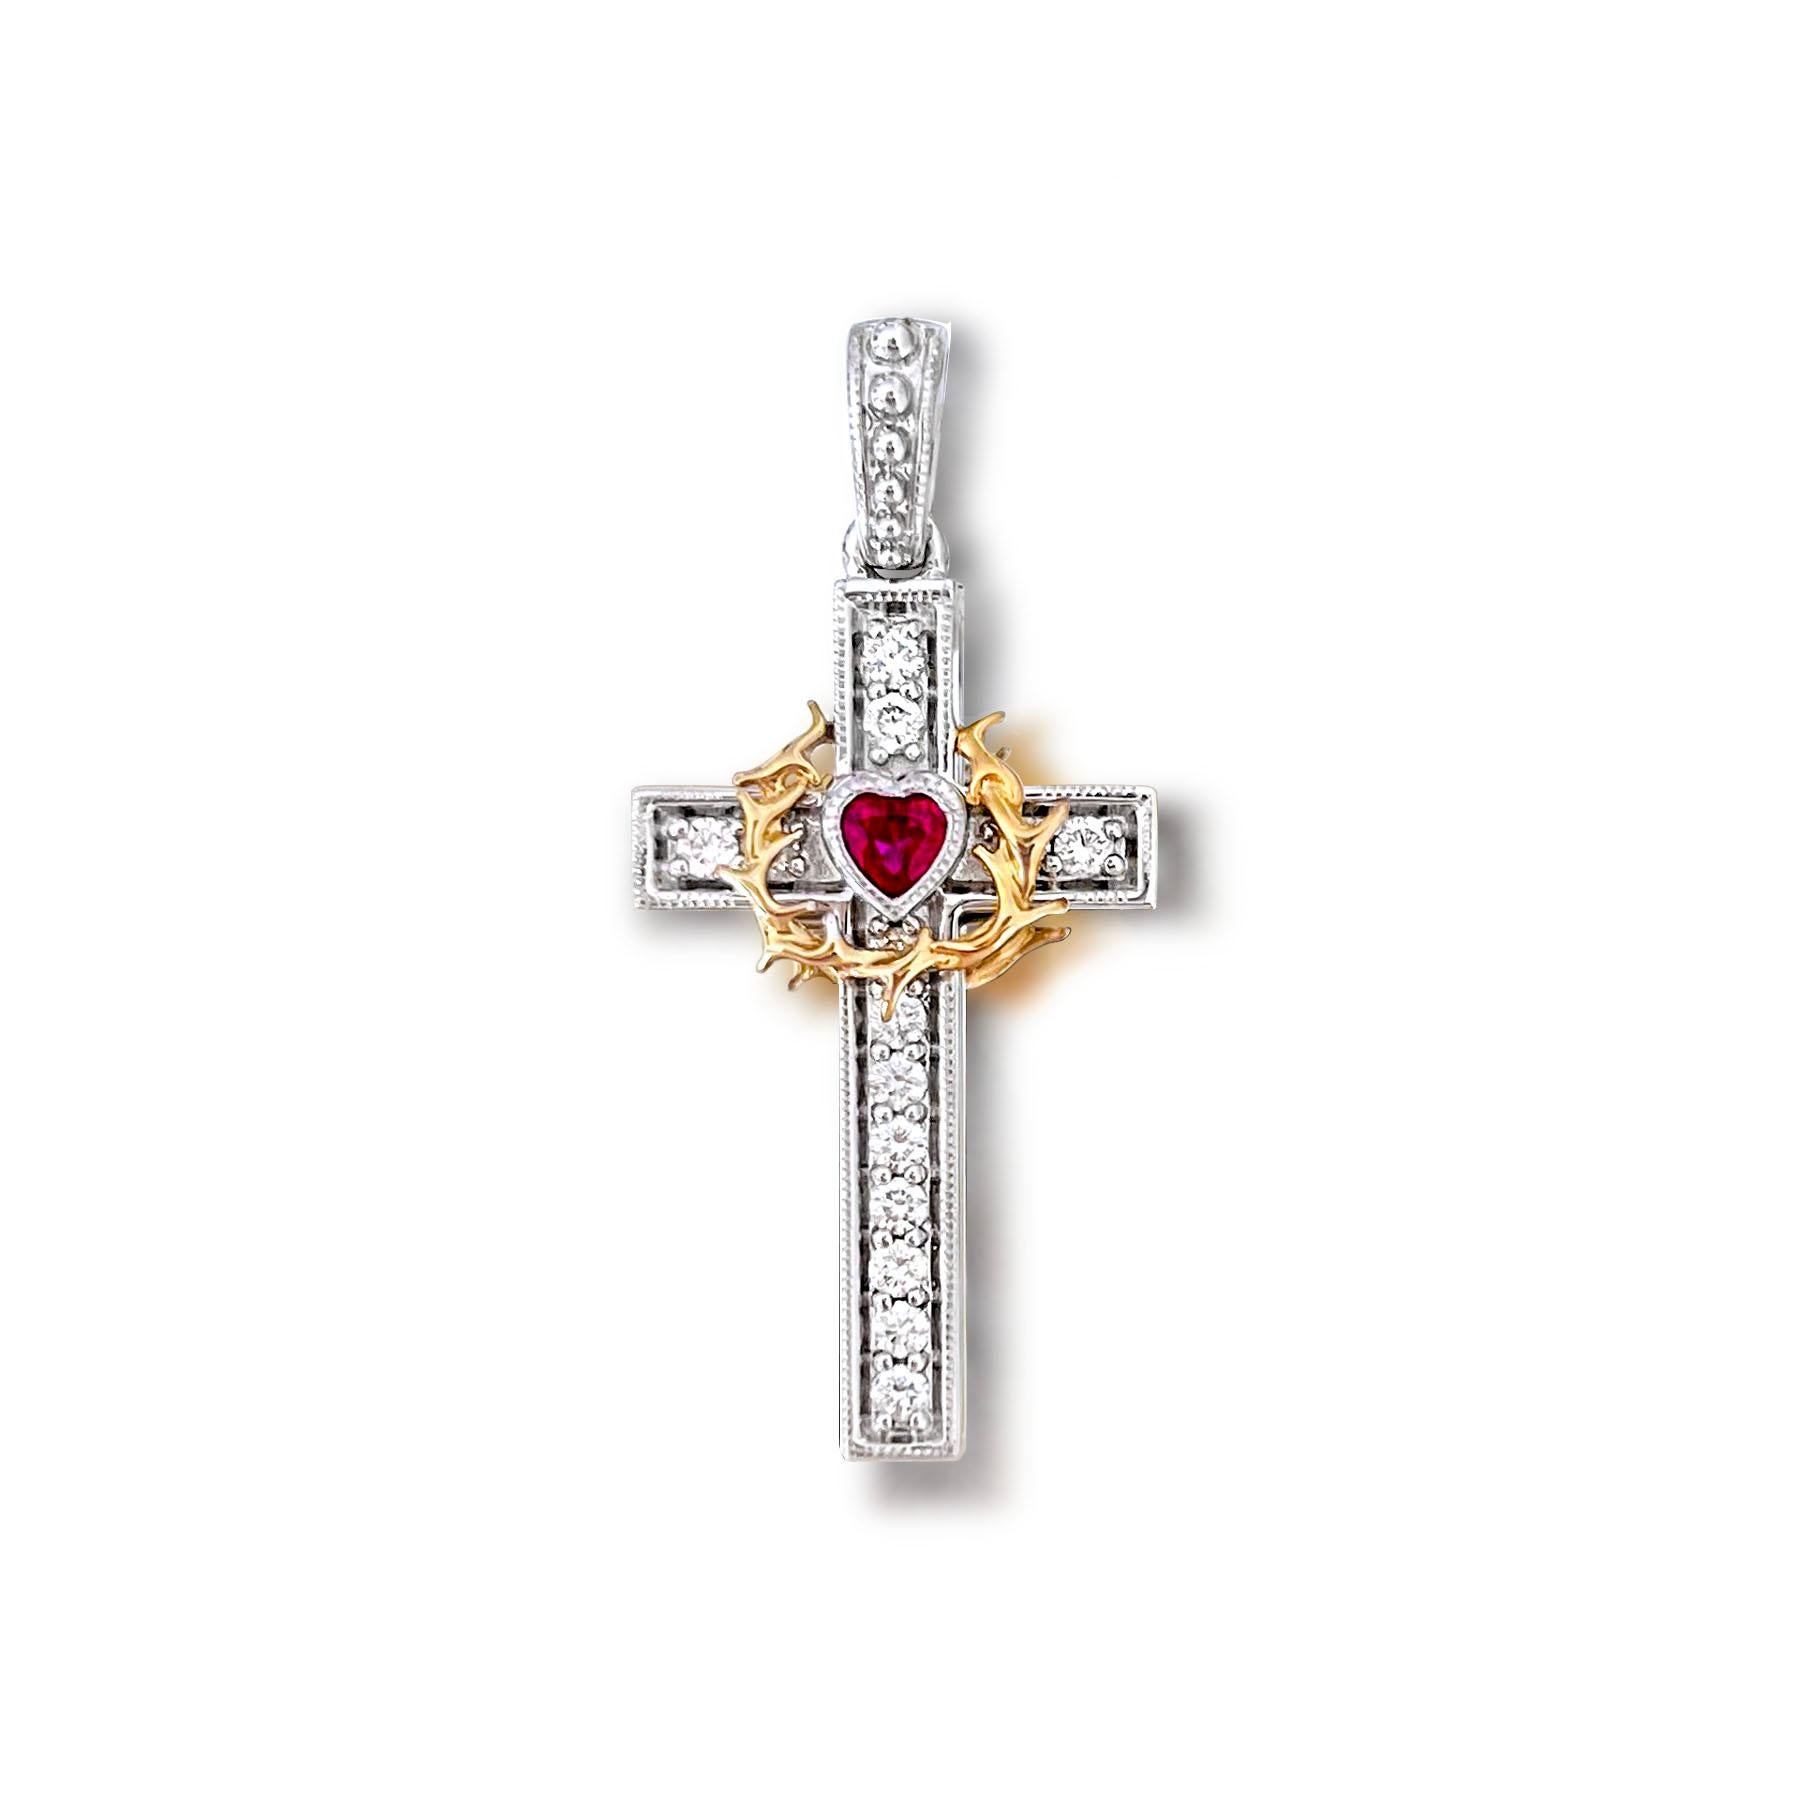 Produced by award winning Italian designer Stefano Vitolo. Stefano creates custom artisanal one of a kind jewelry with excellent gemstones in a truly old world Italian craftmanship.

Gemstones: Ruby 0.23 ctw / Diamonds 0.54 ctw 
Length, width: 18 x